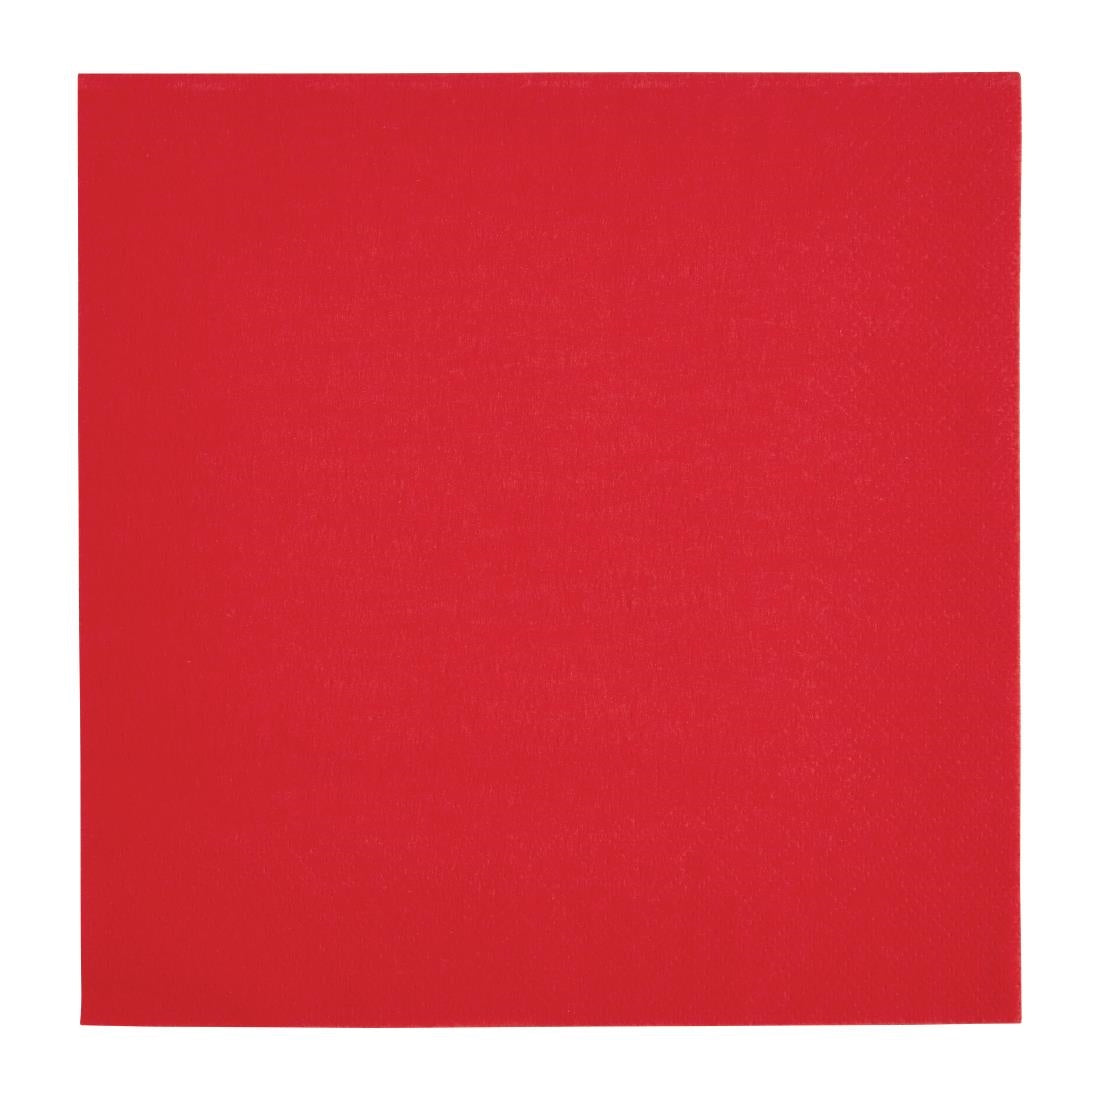 FE238 Fiesta Recyclable Dinner Napkin Red 40x40cm 2ply 1/4 Fold (Pack of 2000) JD Catering Equipment Solutions Ltd